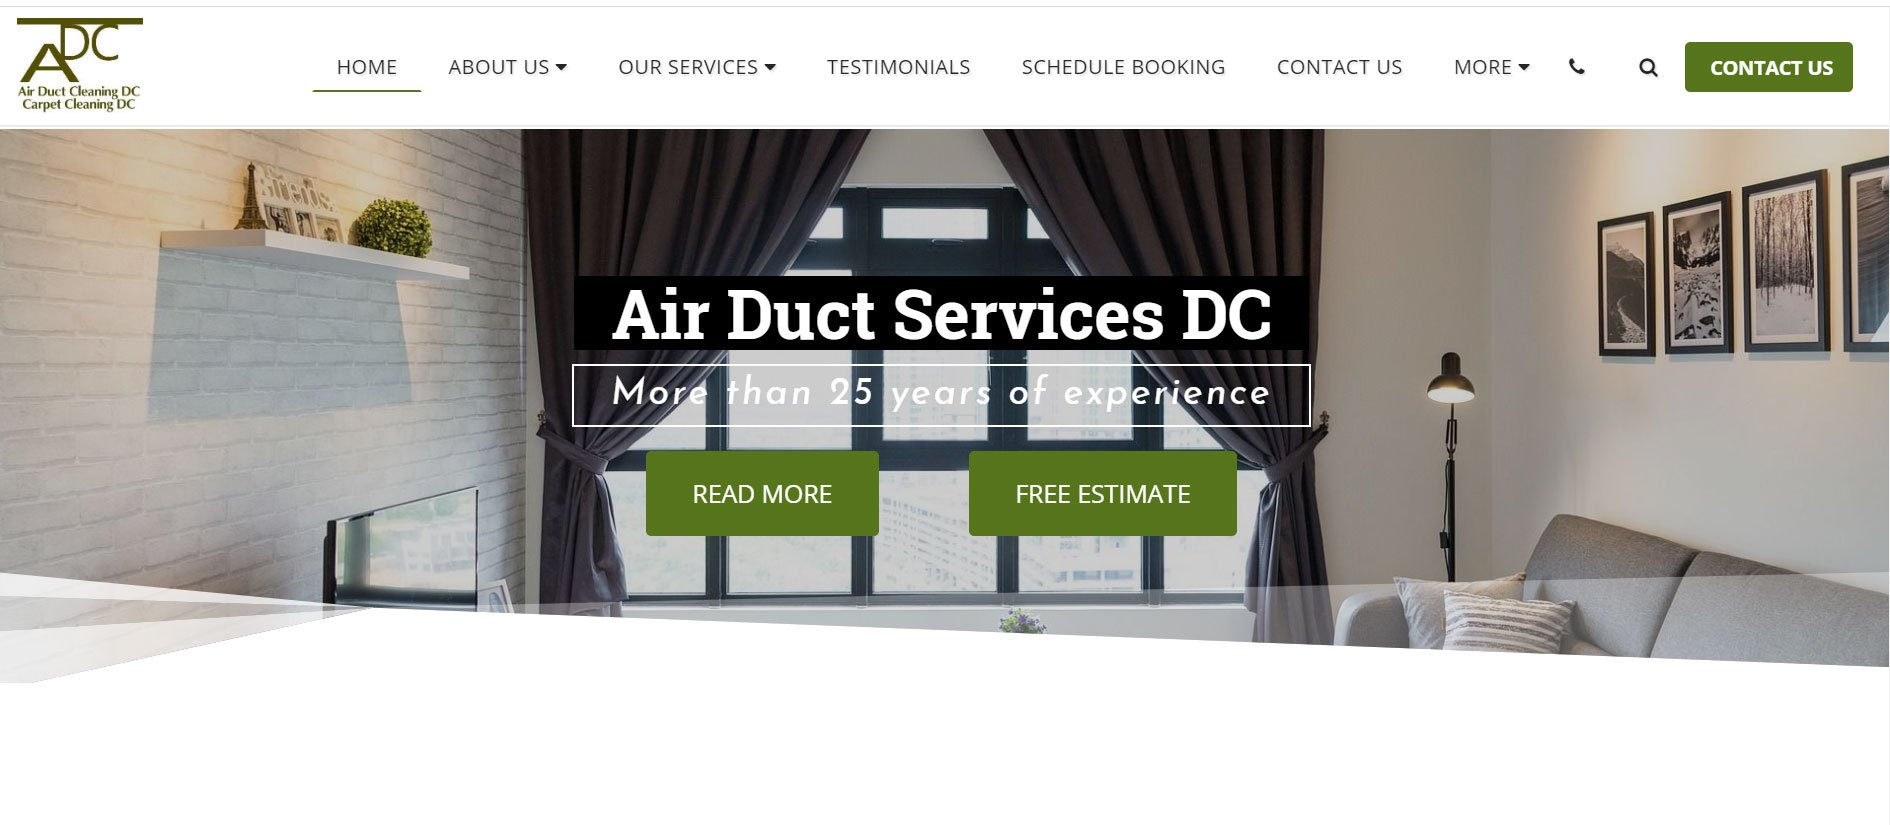 Air Duct Professionals DC